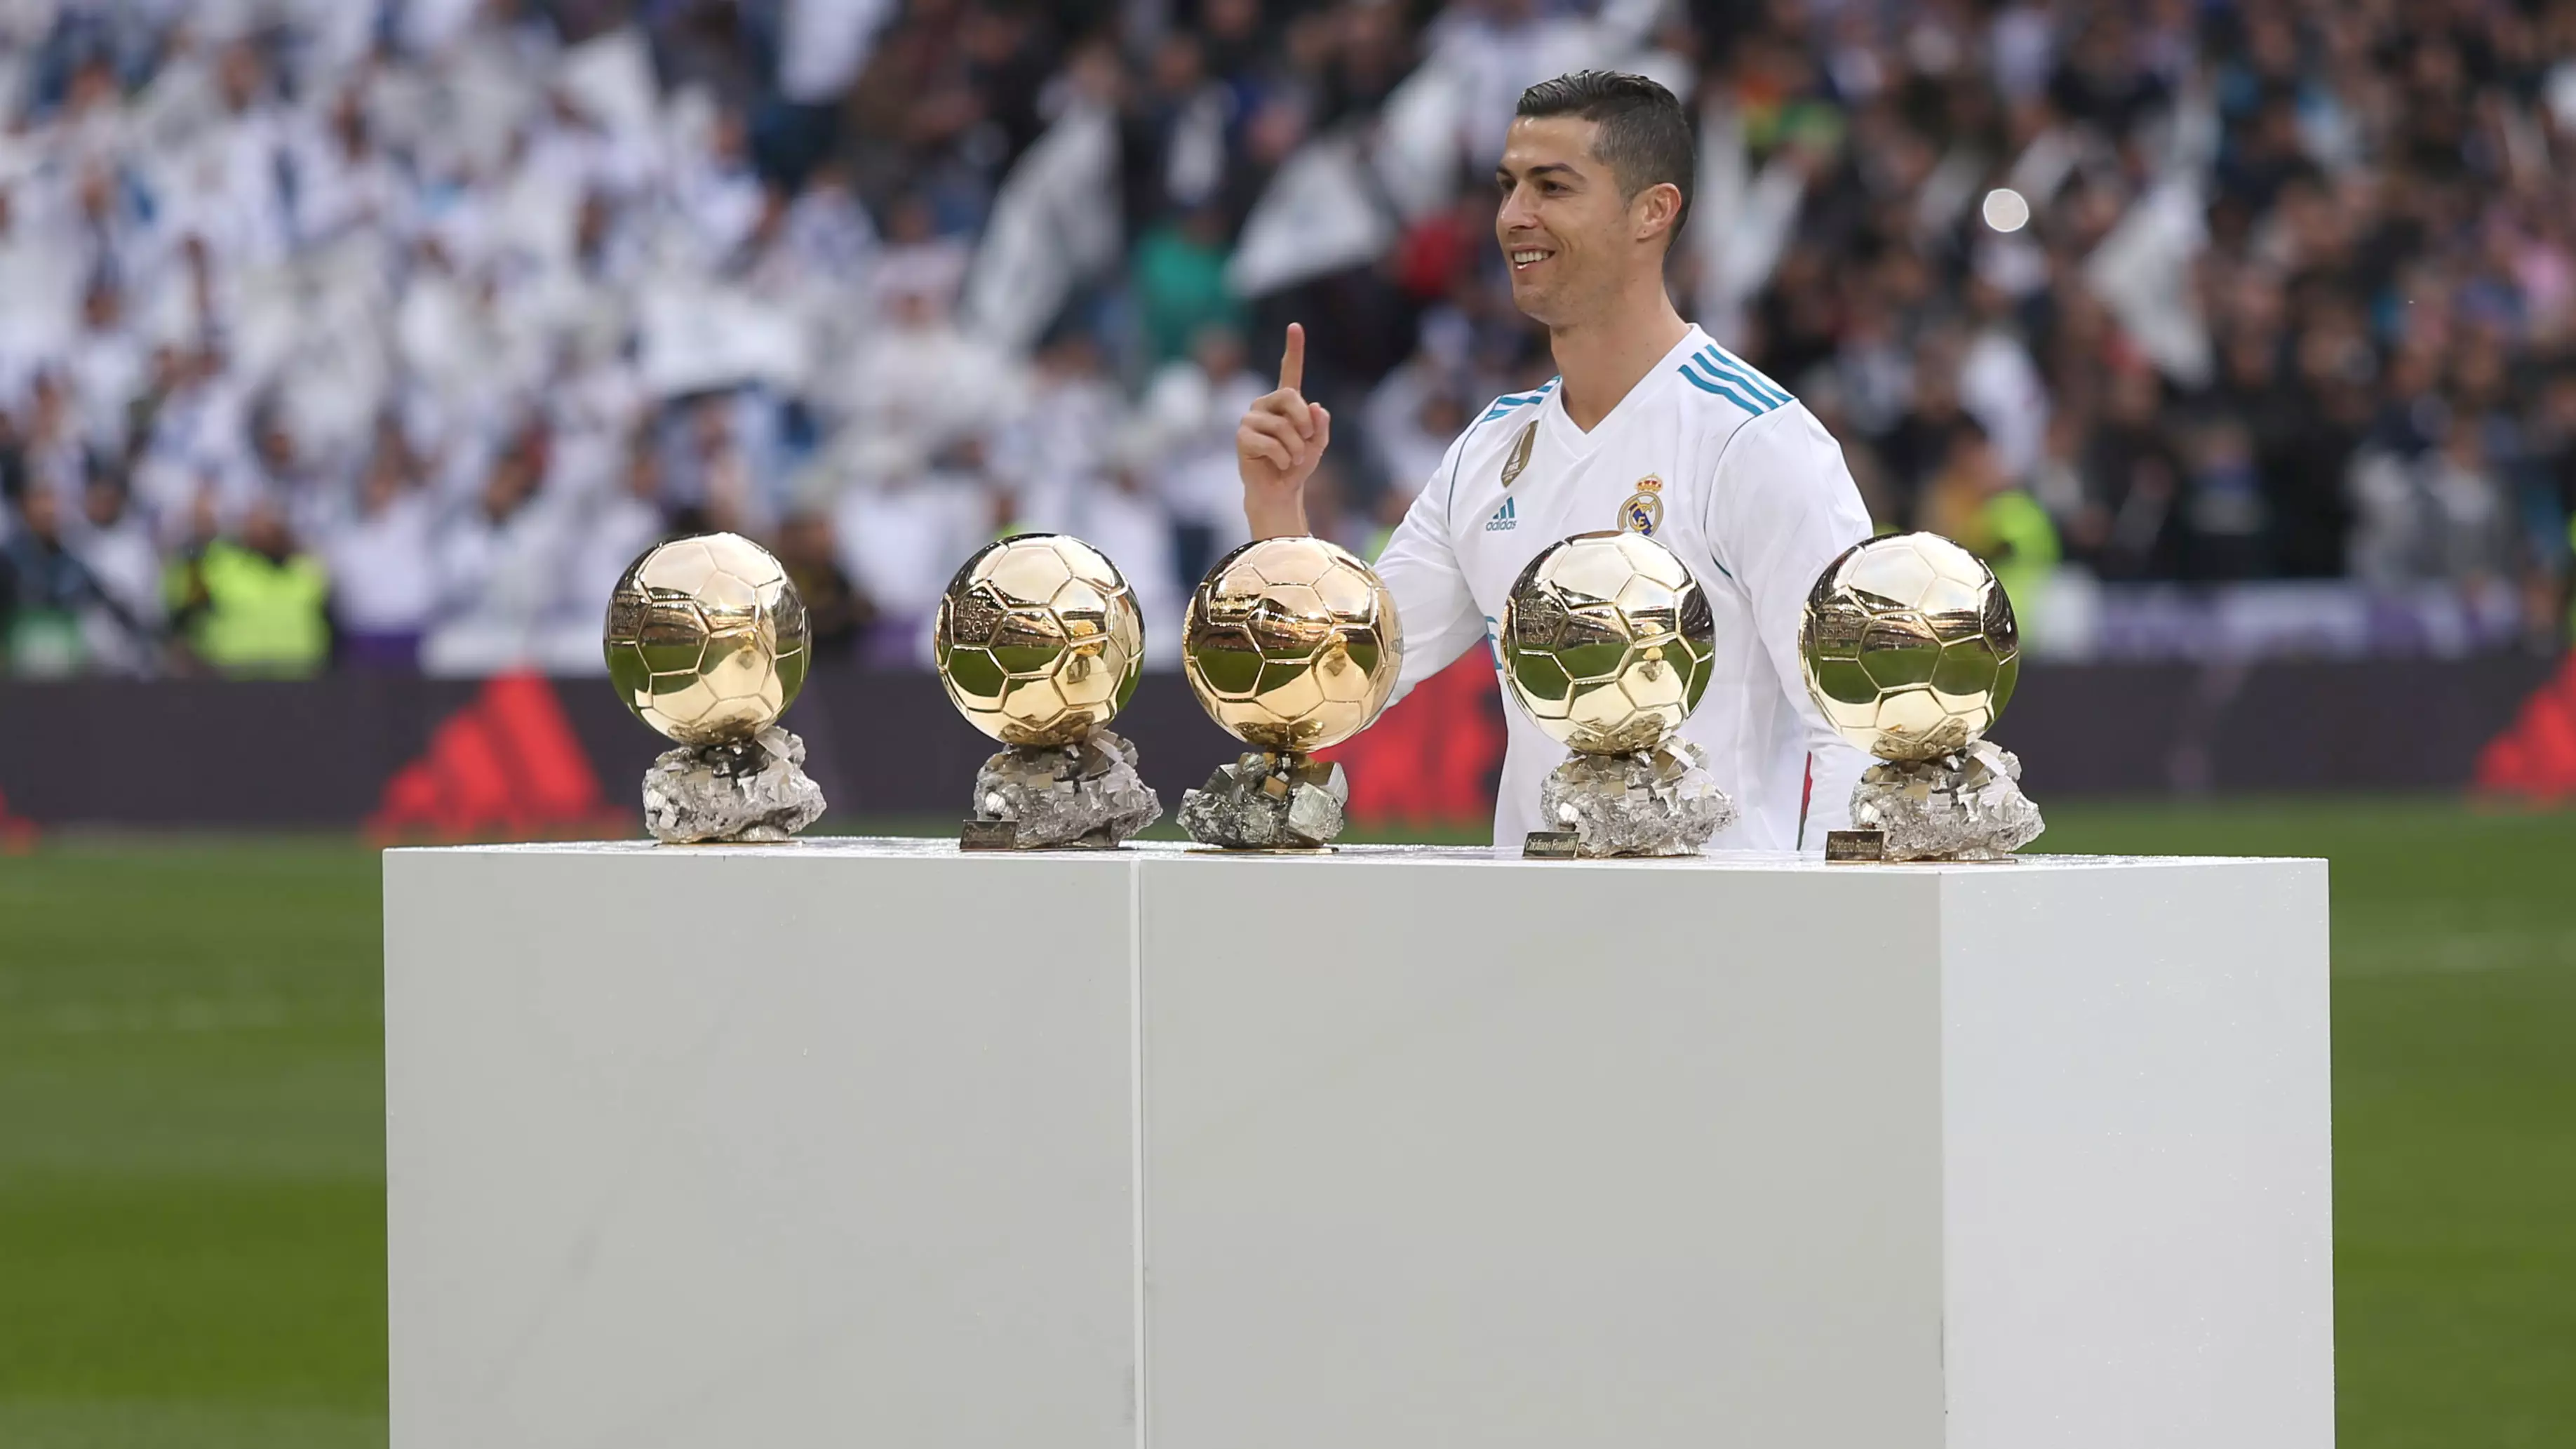 Journalist's Conspiracy Theory For Why Cristiano Ronaldo Didn't Win Ballon d'Or